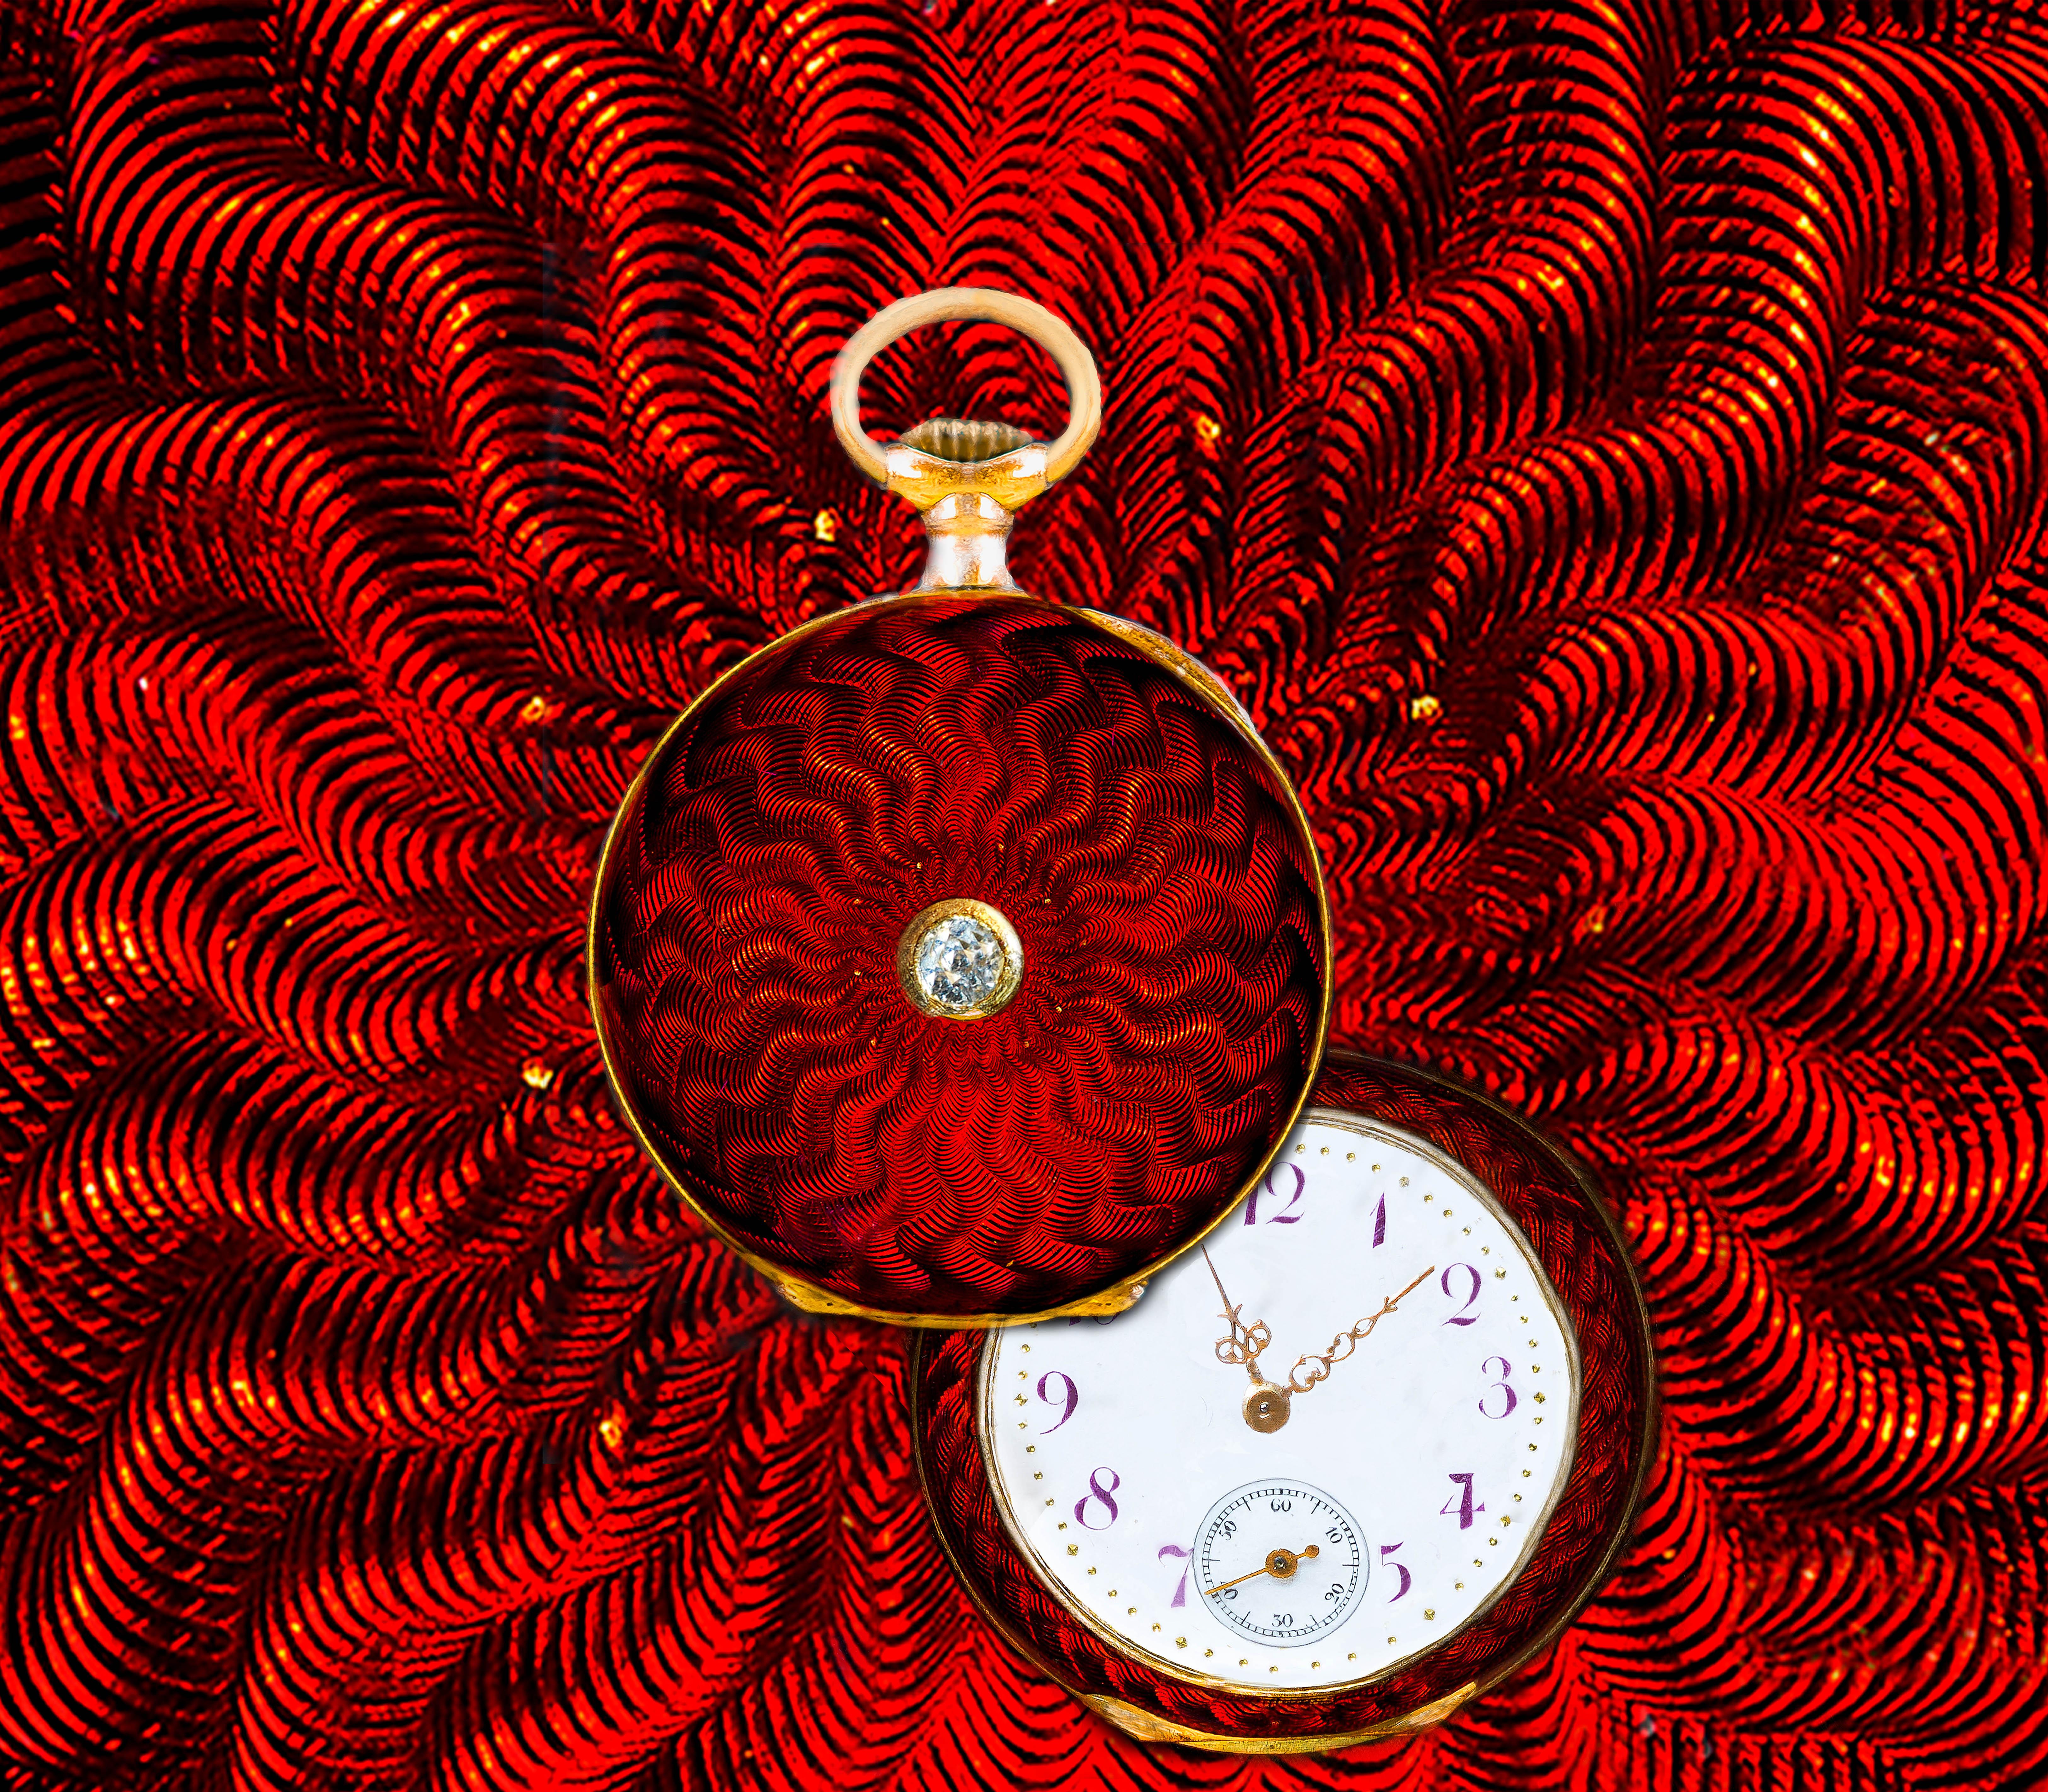  An Impressive Art Nouveau French 1880s Gold “Sun Ray” Motif Hand Cut Rose Cut Diamond Set “Zig Zag” Guilloche Enamel Hand Painted Enamel Breguet Pendant Lapel Pocket Watch 

 
Basic Dimensions & Specifications  
-35mm Length mm (from top of Bow to